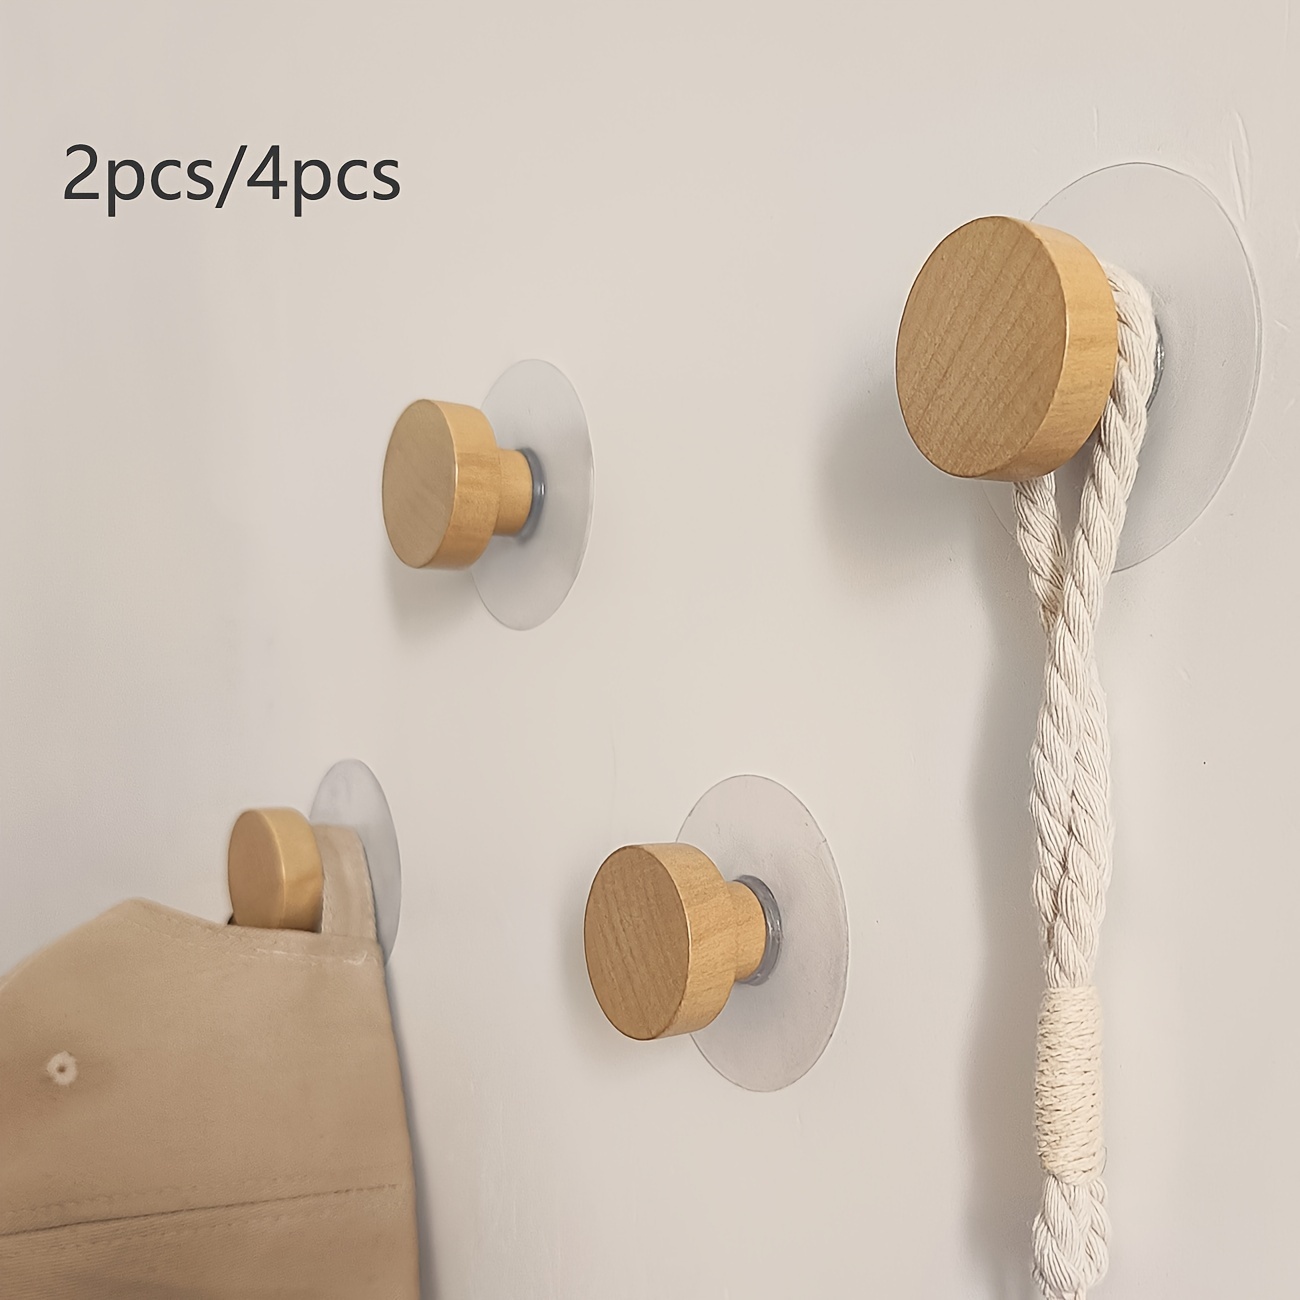 

Easy-install Wooden Wall Hook - Geometric Design For Clothes, Coats, Hats, Scarves & Towels - Paint-finished, Self-adhesive For Bedroom & Cabinet Doors